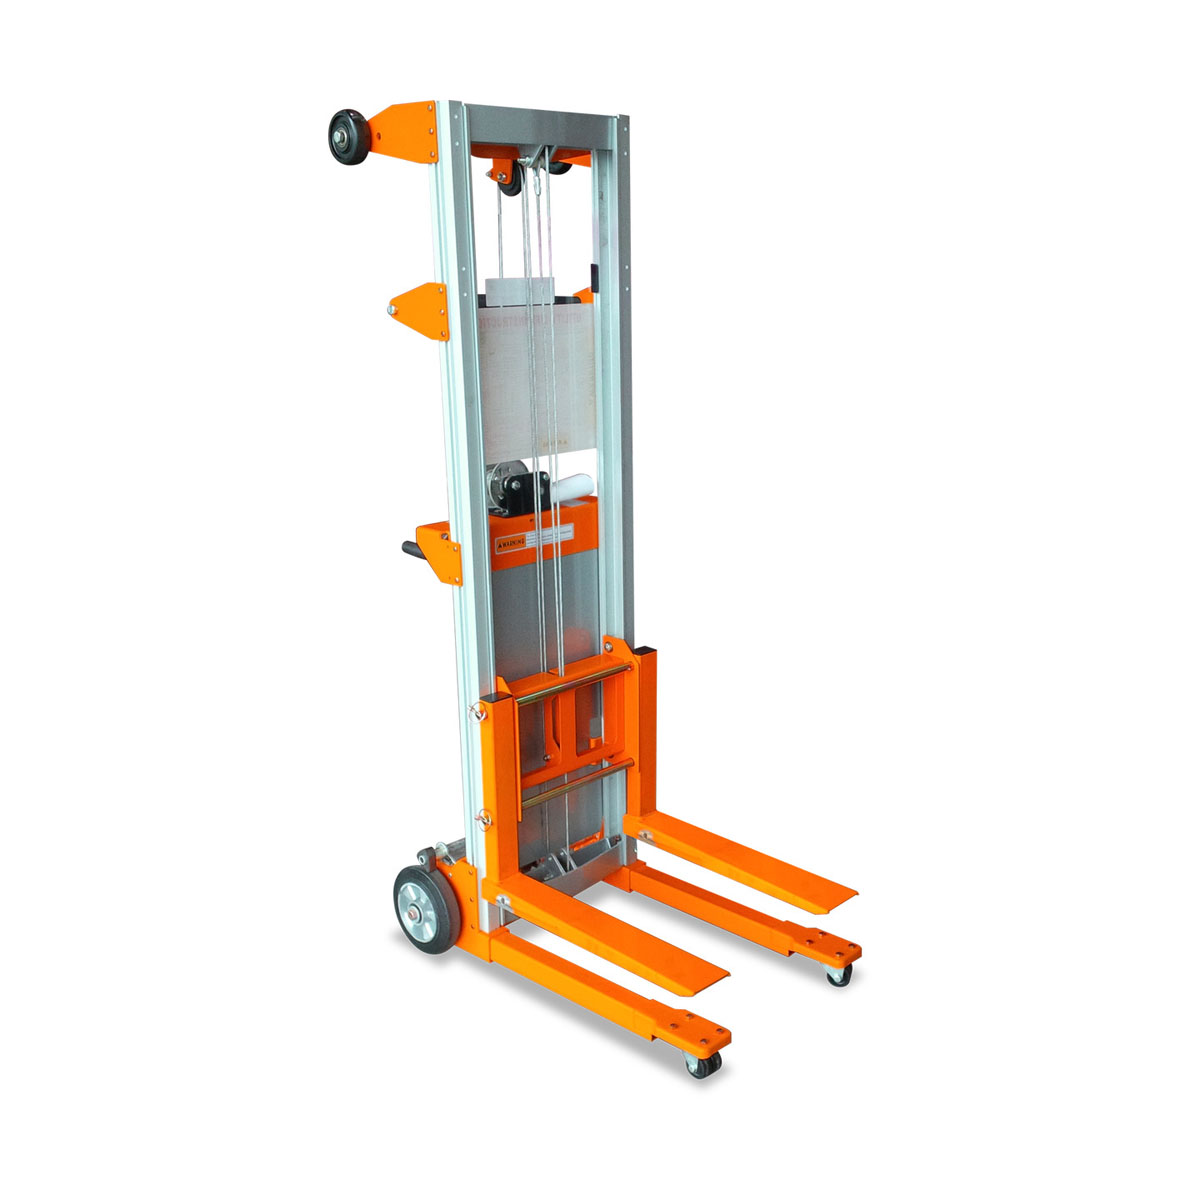 Buy Fork Lifter (Winch) in Utility Lifters | Materials Handling Lift Towers from Astrolift NZ